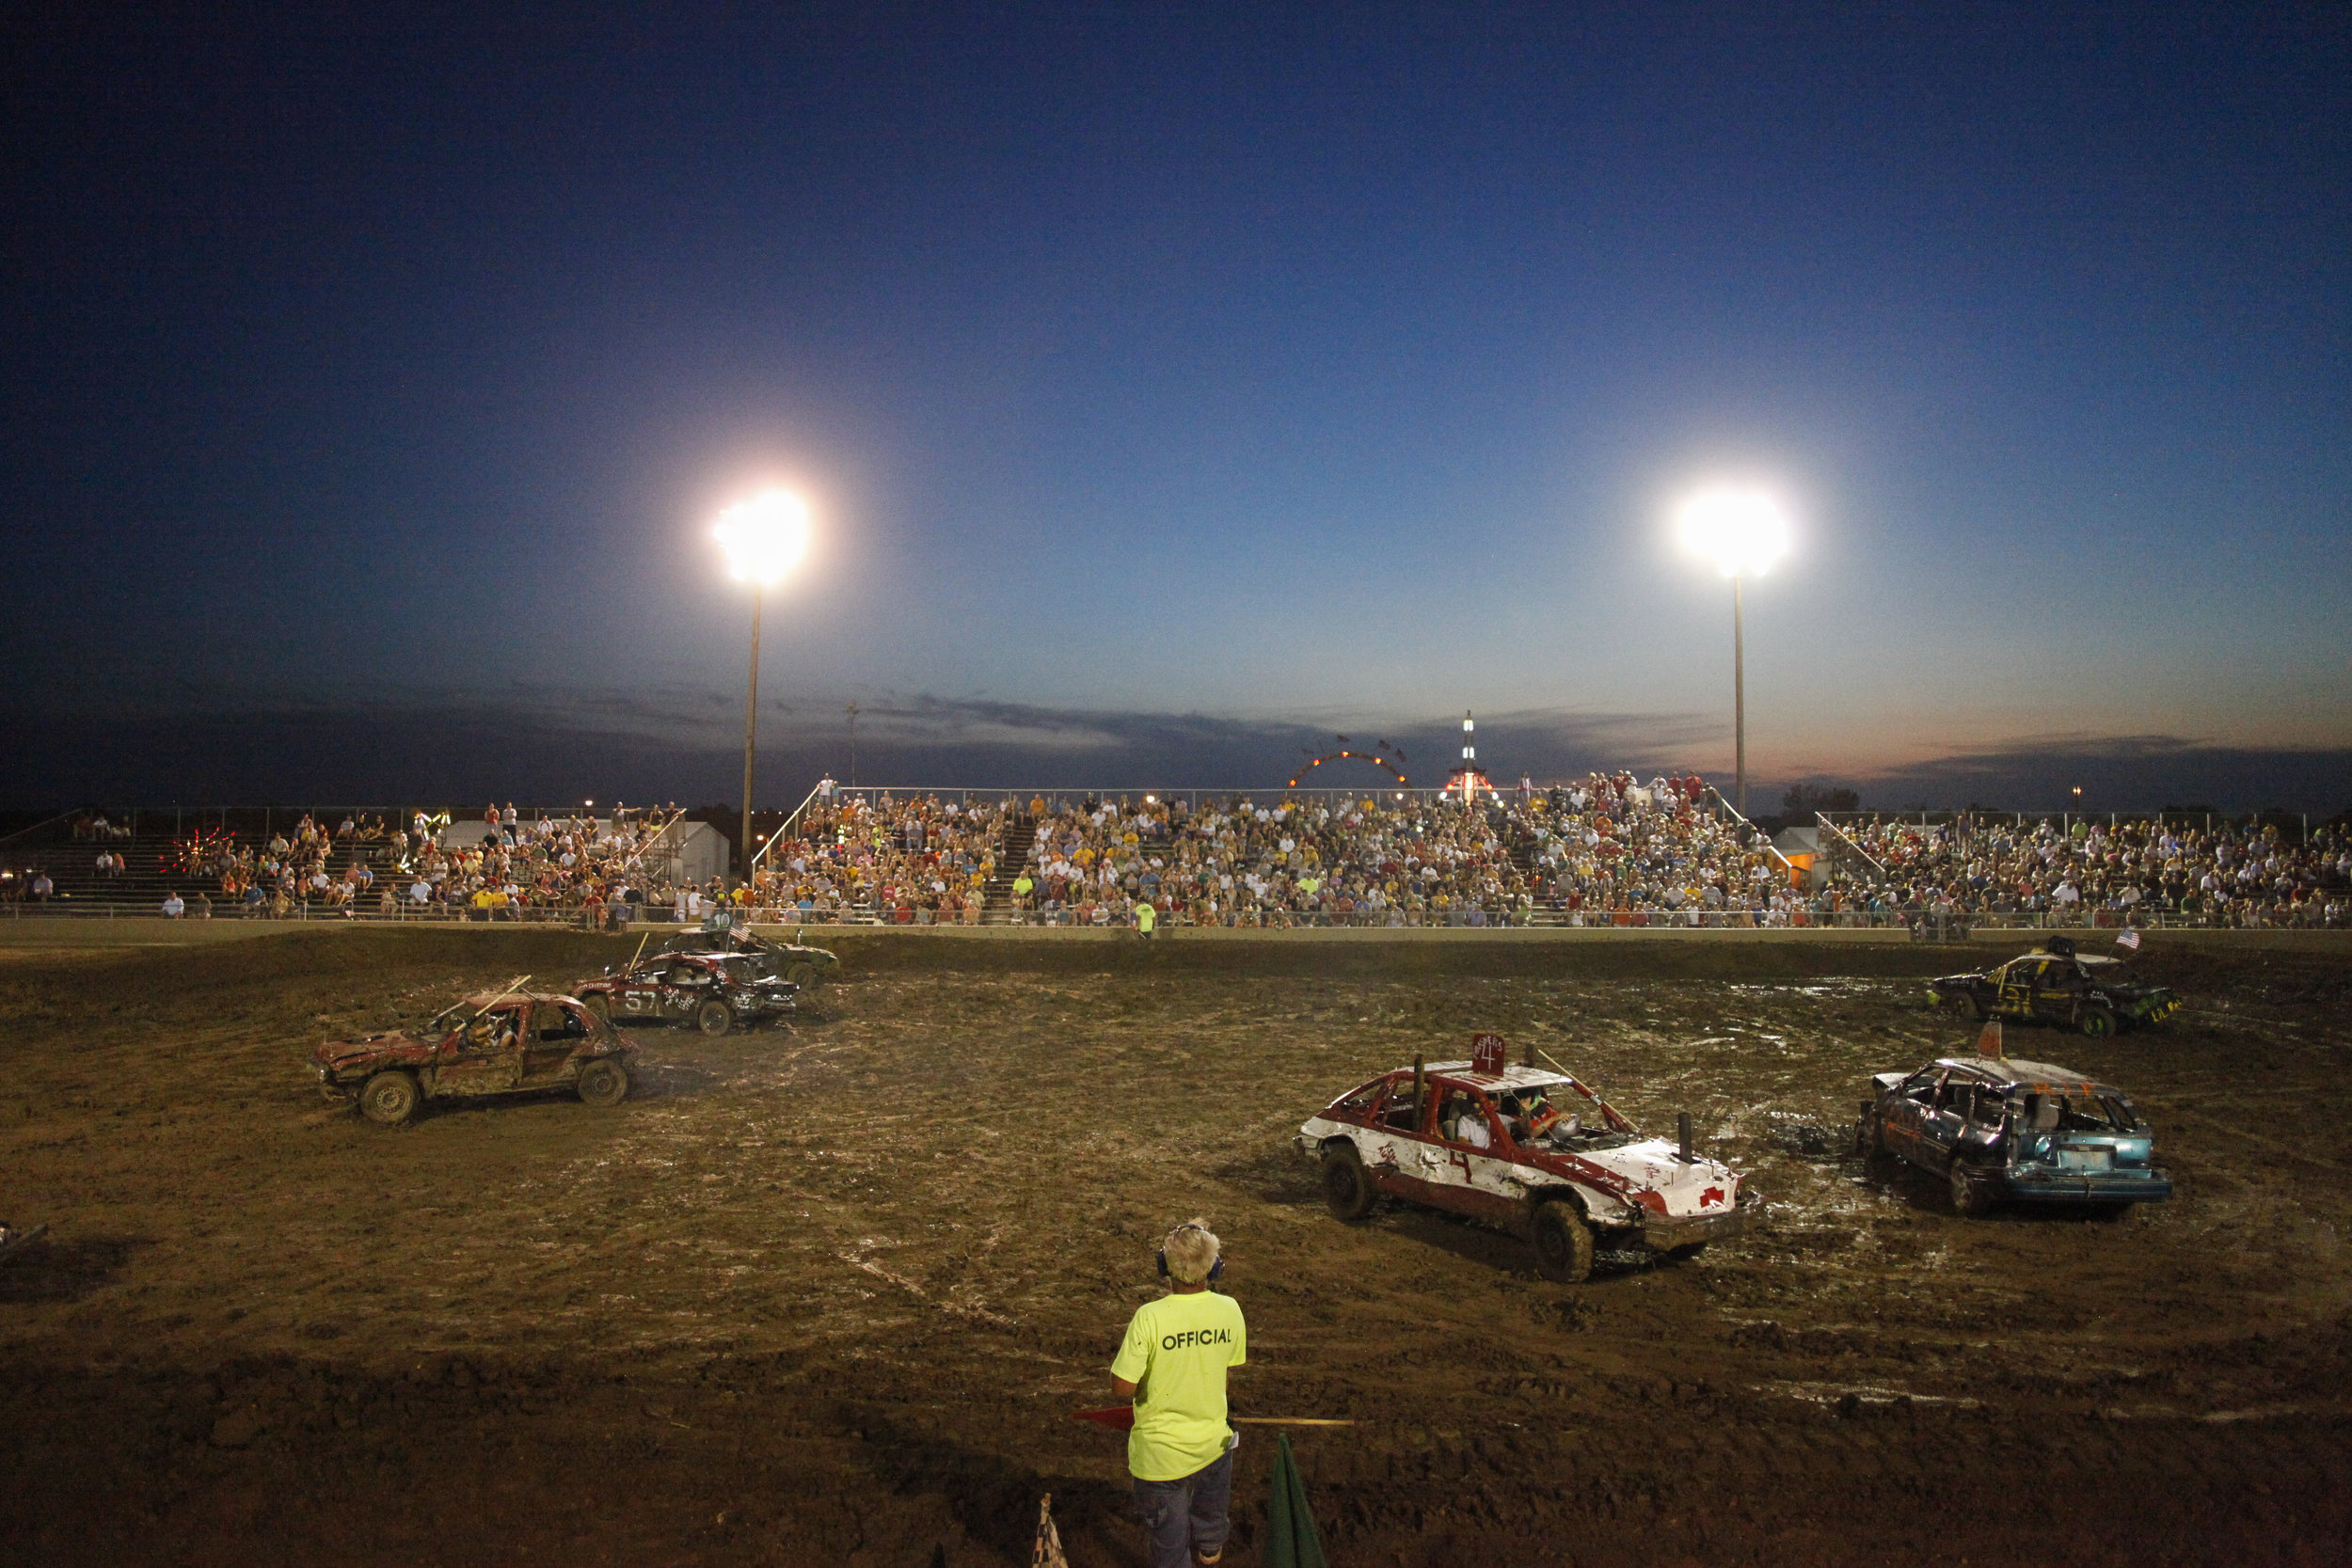   Demolition Derby participants wait to restart the race after a short break Wednesday evening, July 25, 2012 at Boone County Fairgrounds. 